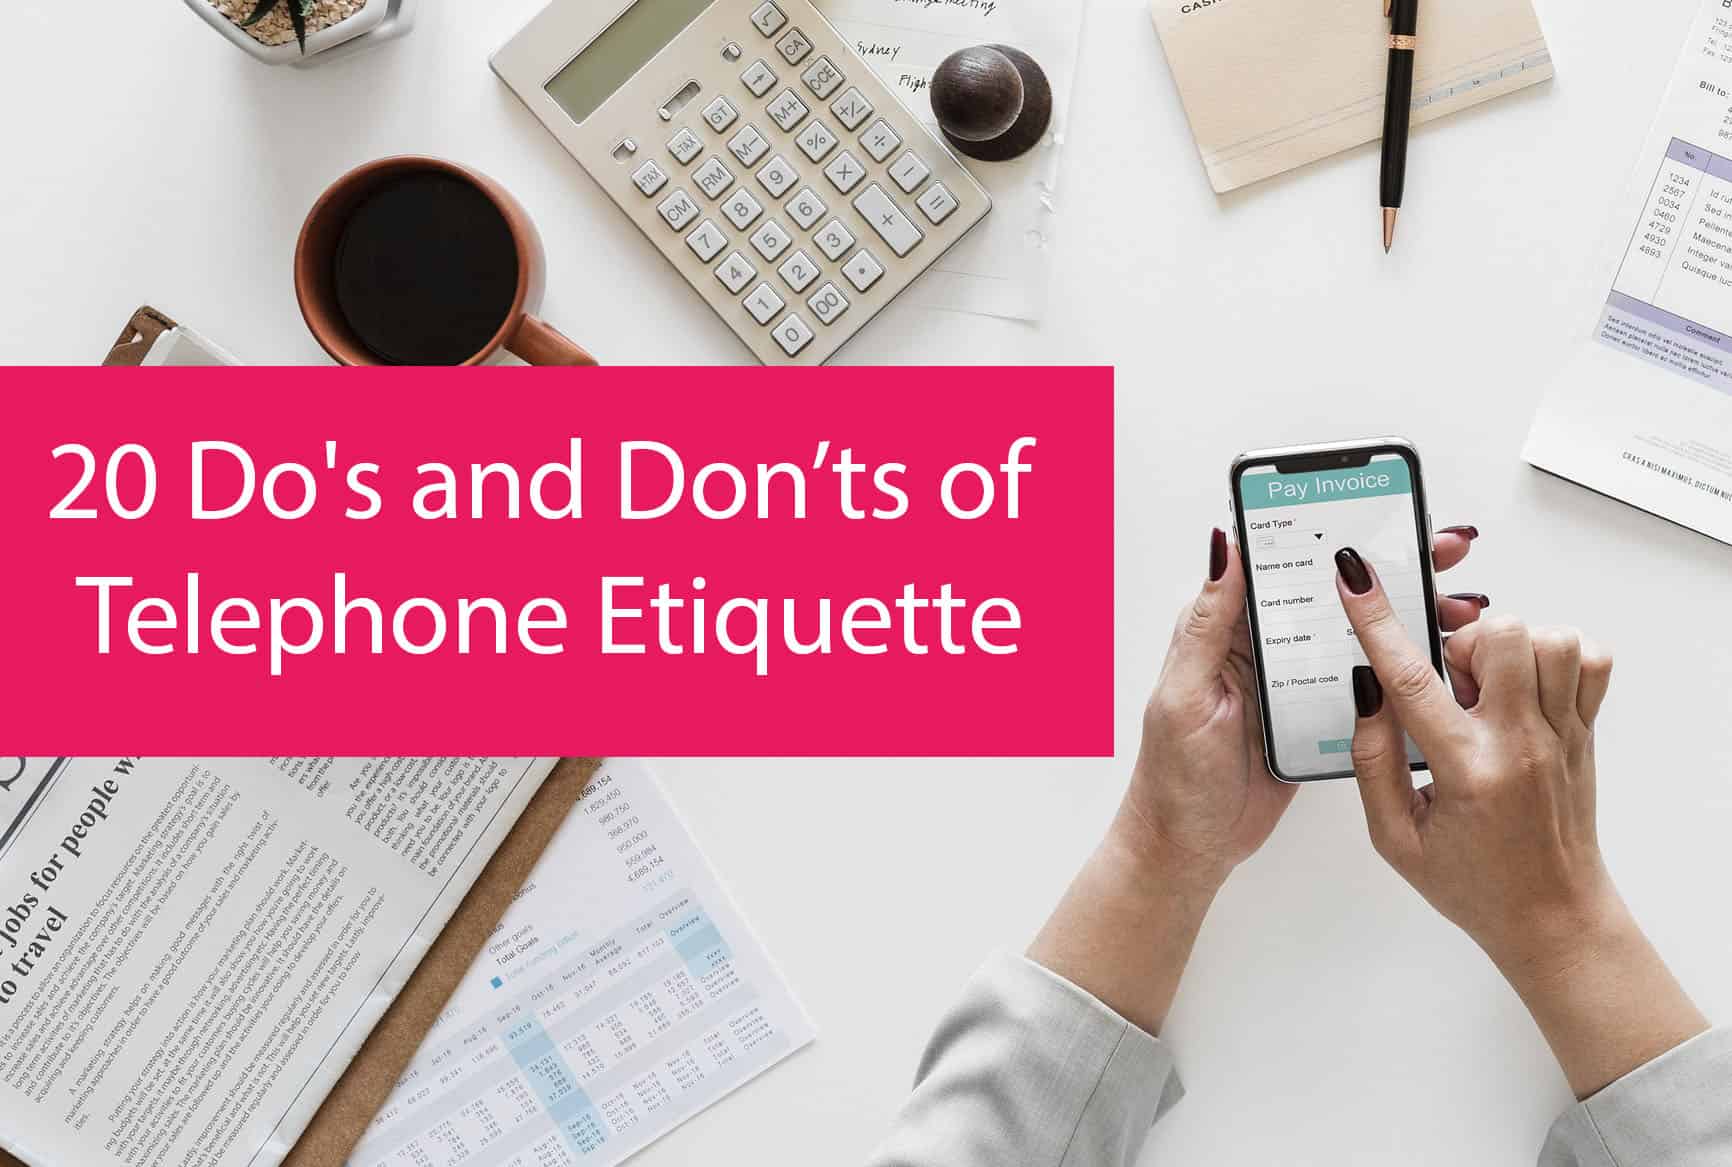 20 dos and donts of telephone etiquette